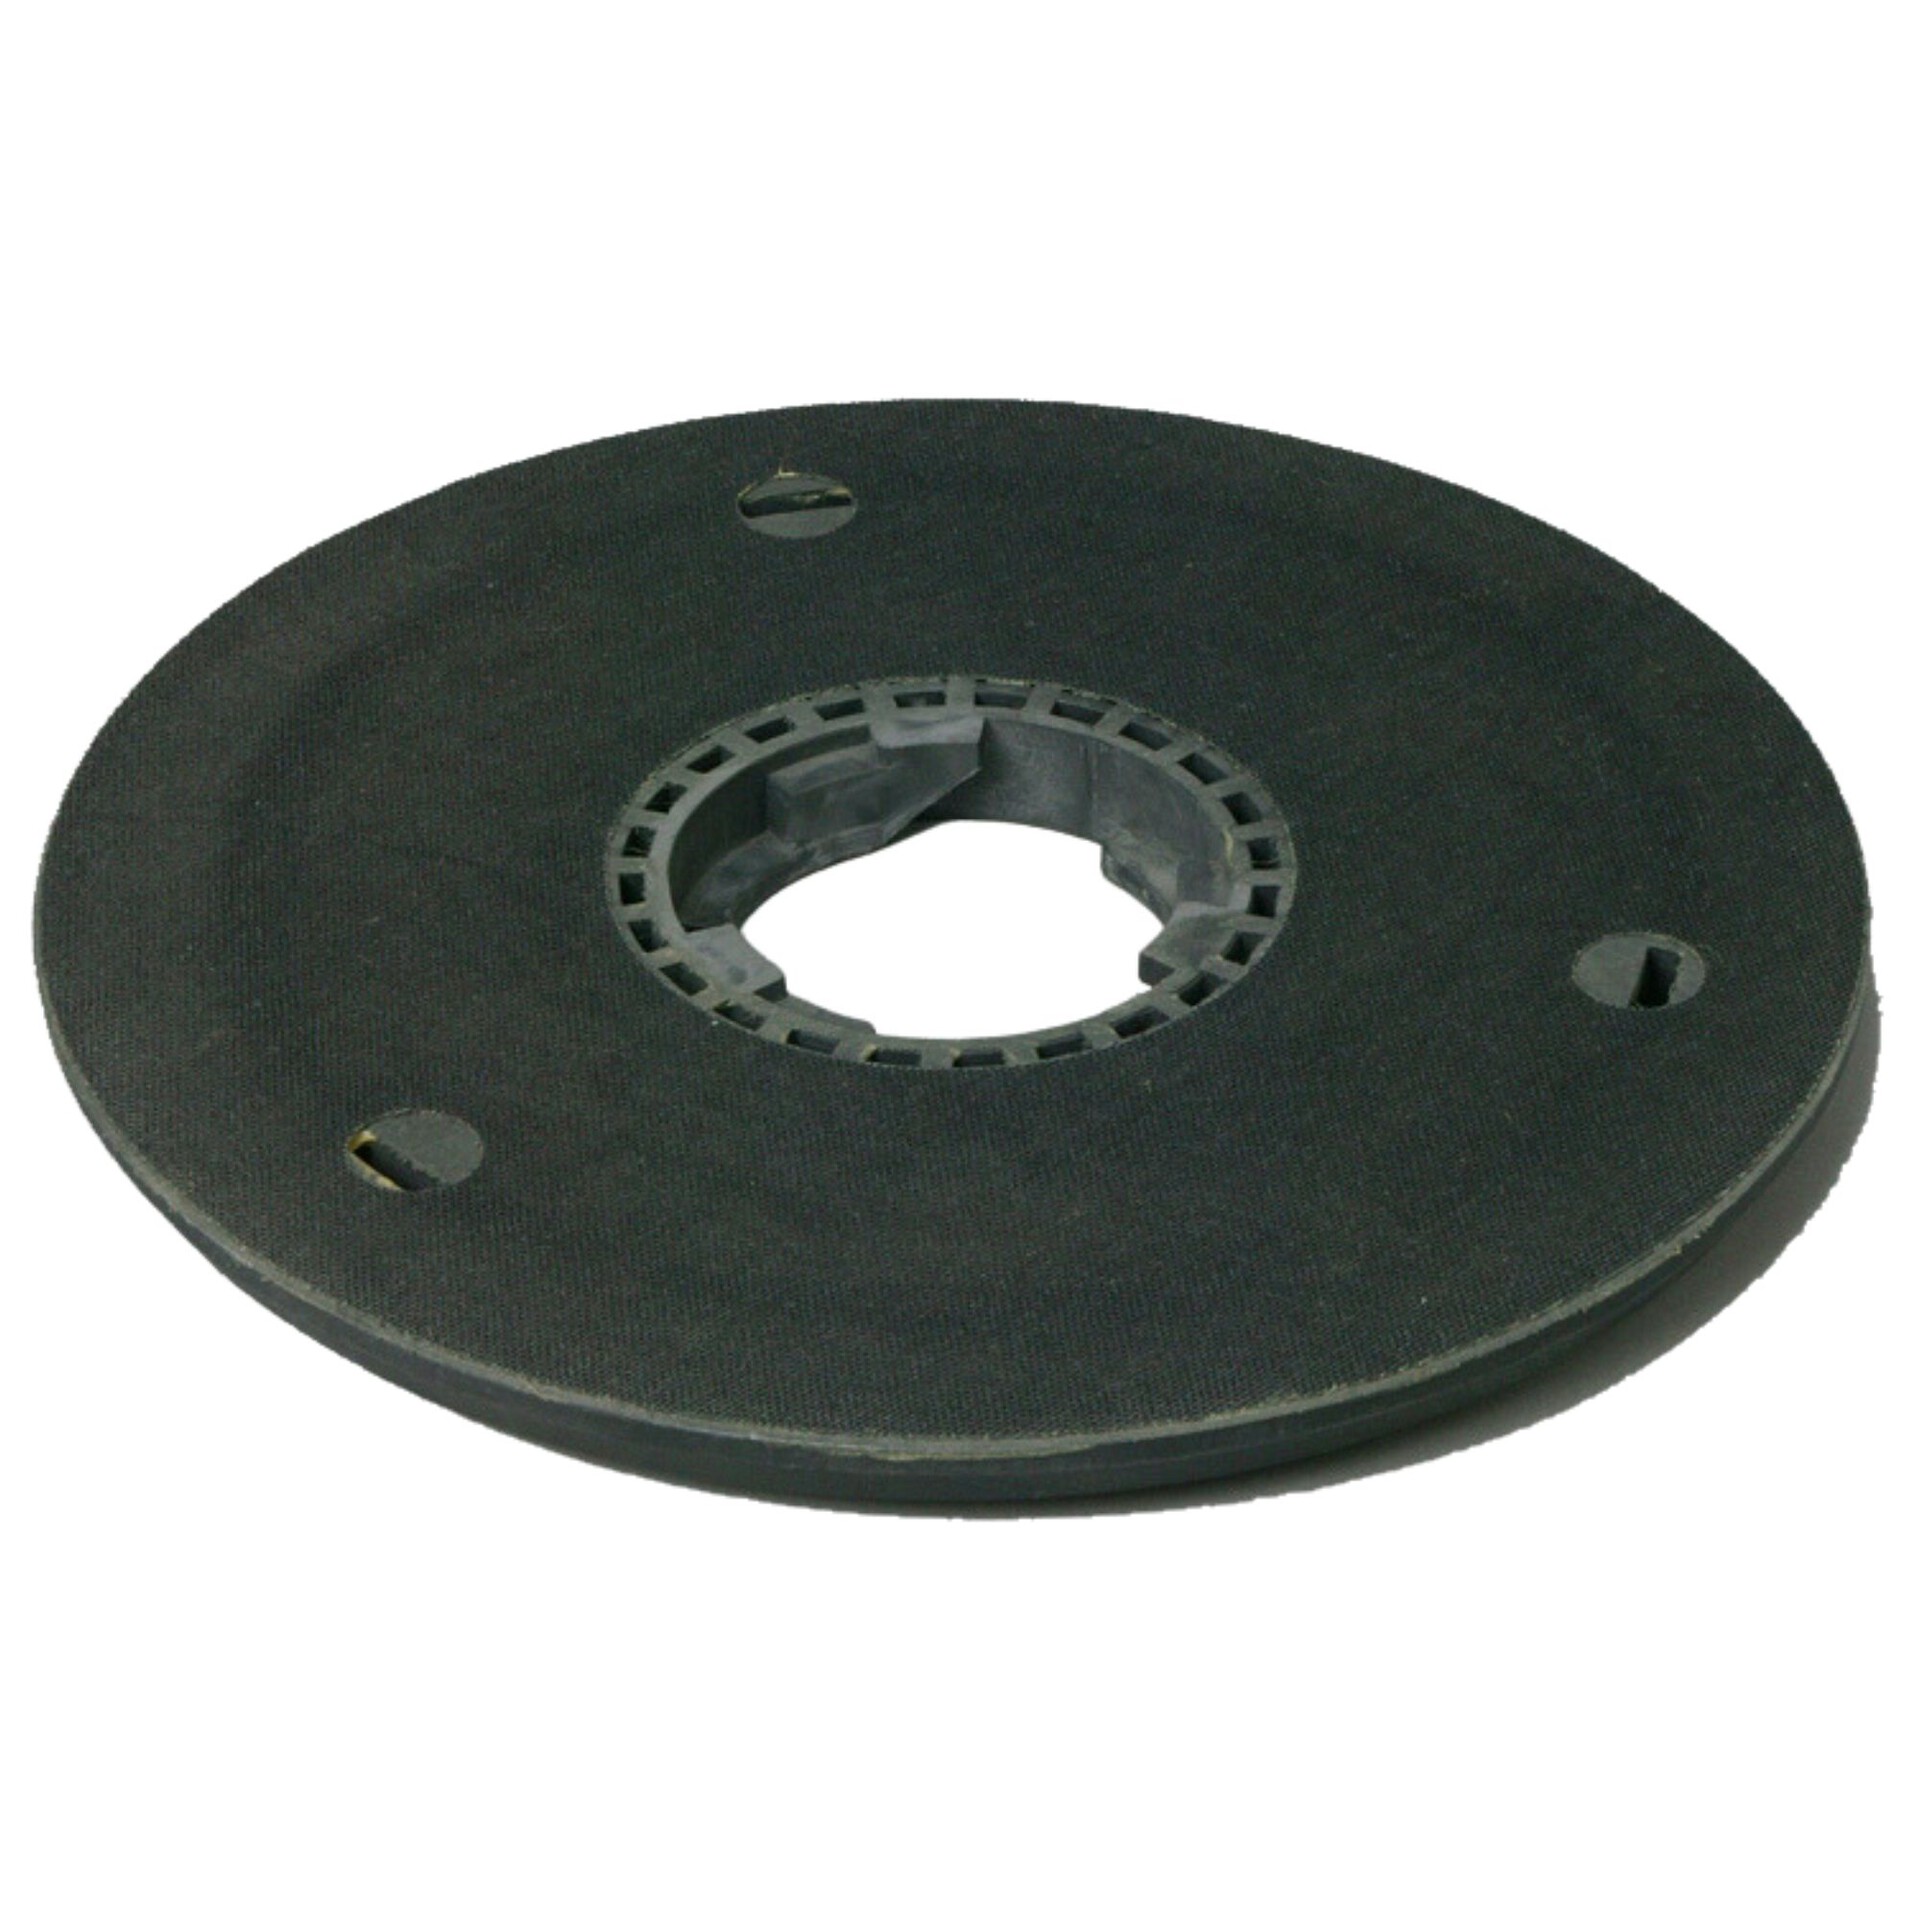 Driving disc with Velcro